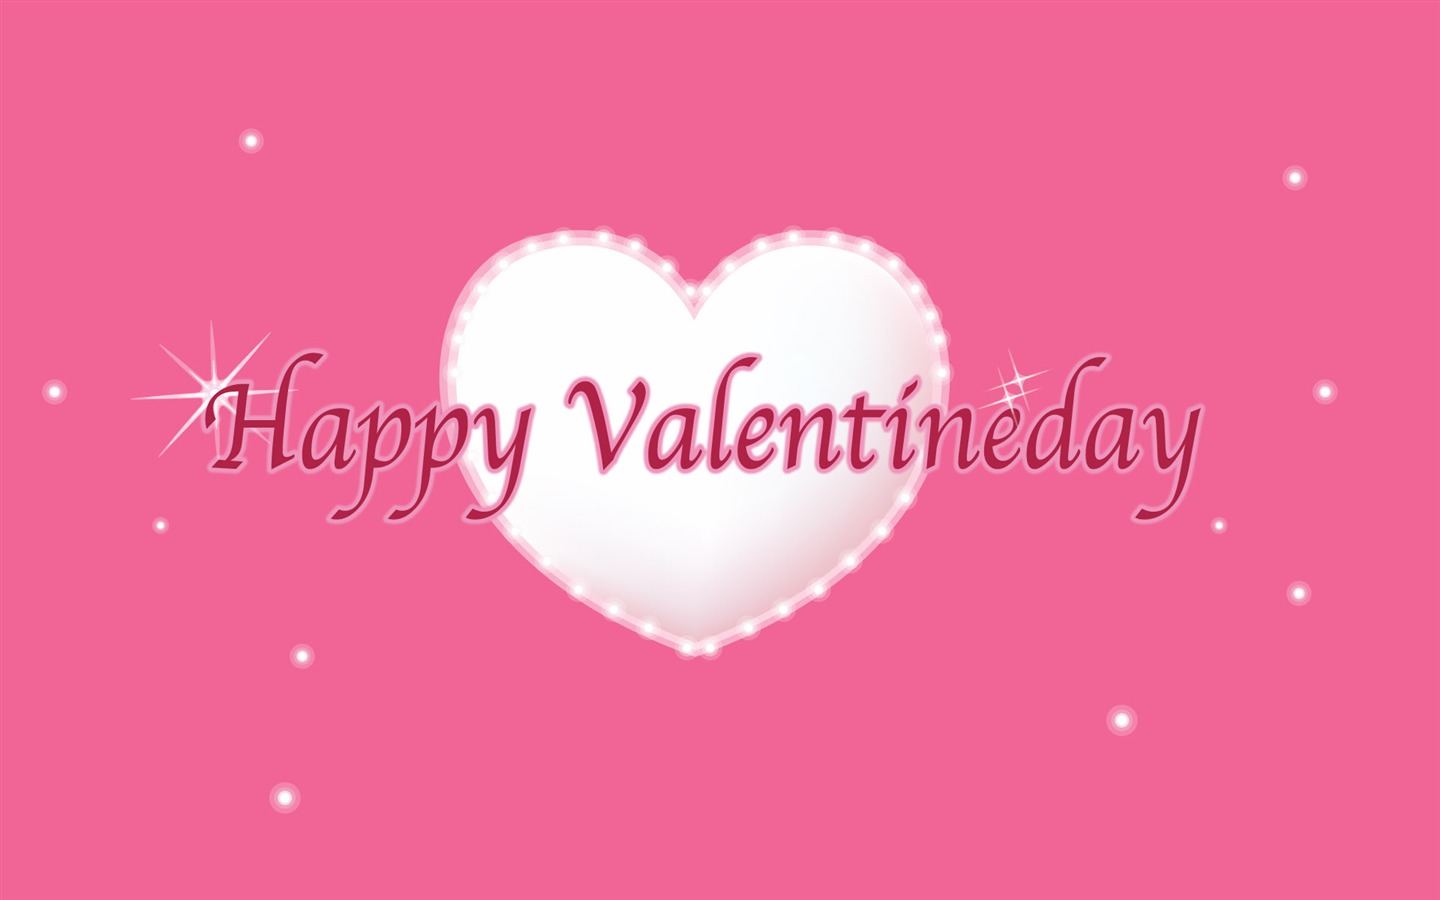 Valentine's Day Love Theme Wallpapers (3) #9 - 1440x900